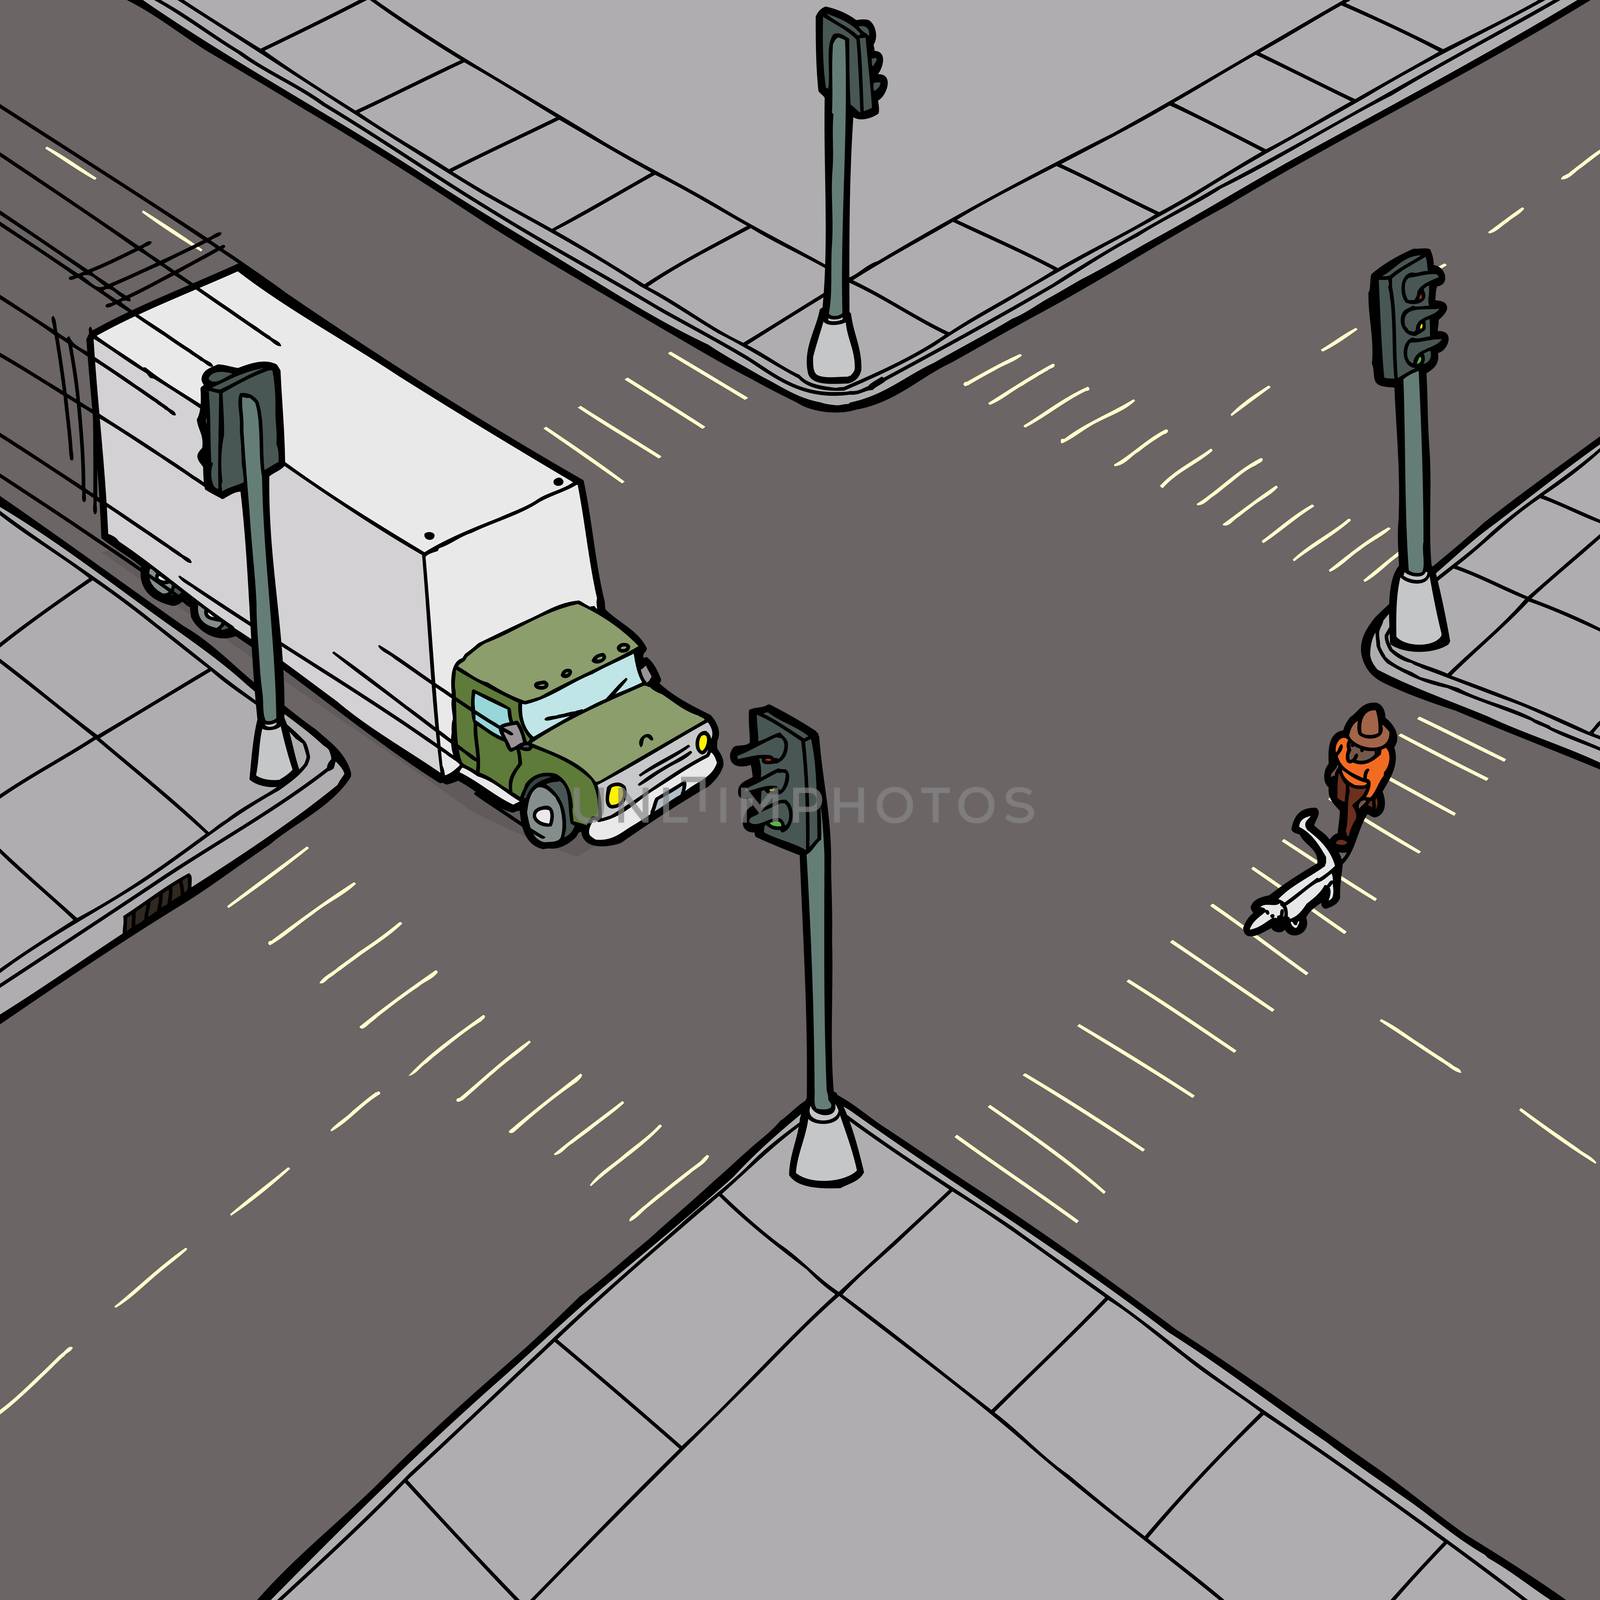 Truck Driving Into Pedestrian by TheBlackRhino